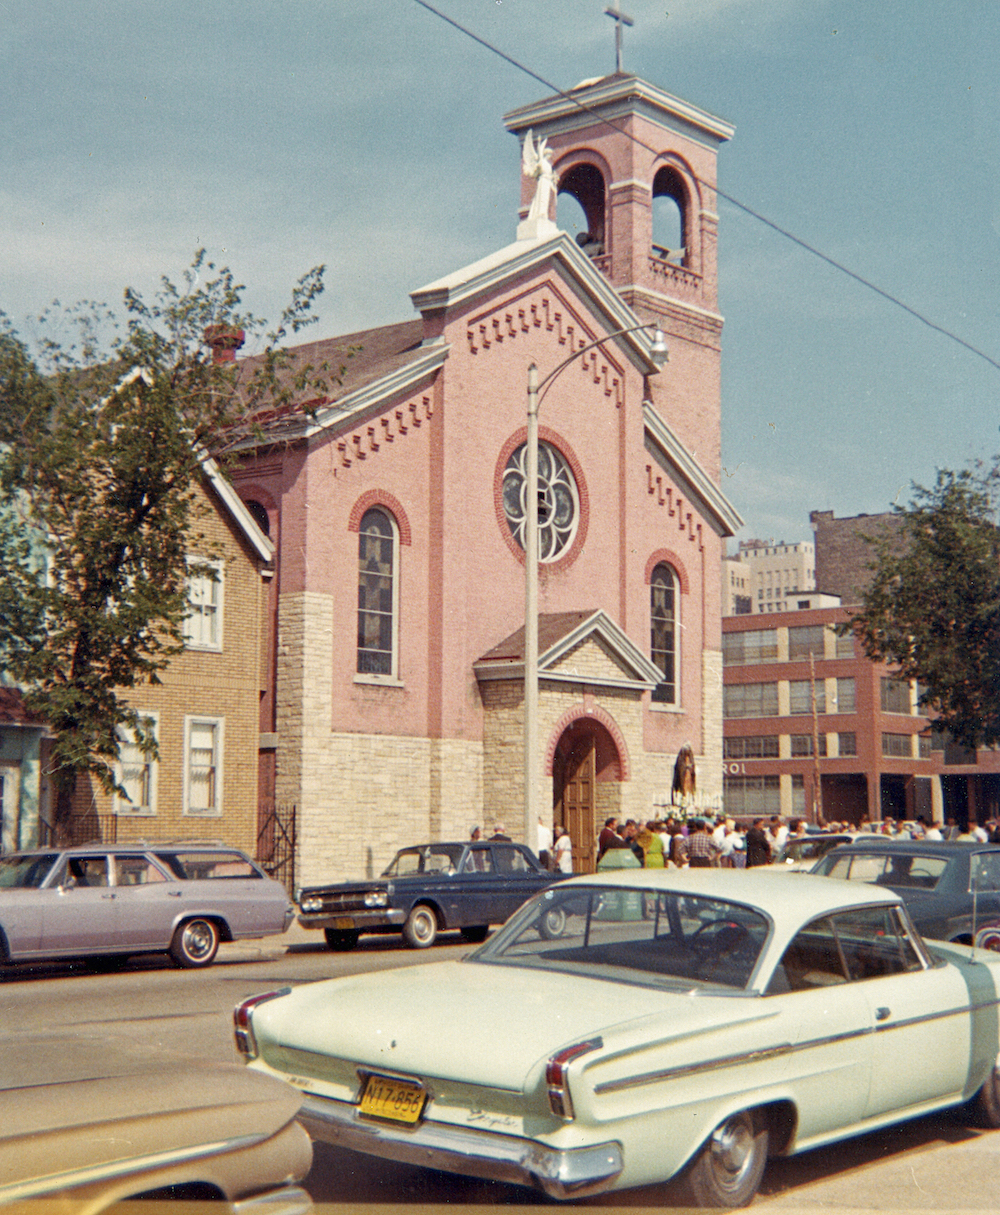 Prior to its razing in 1967, the Blessed Virgin of Pompeii was an institution central to Milwaukee's Italian community and a popular landmark because of its colorful exterior. 